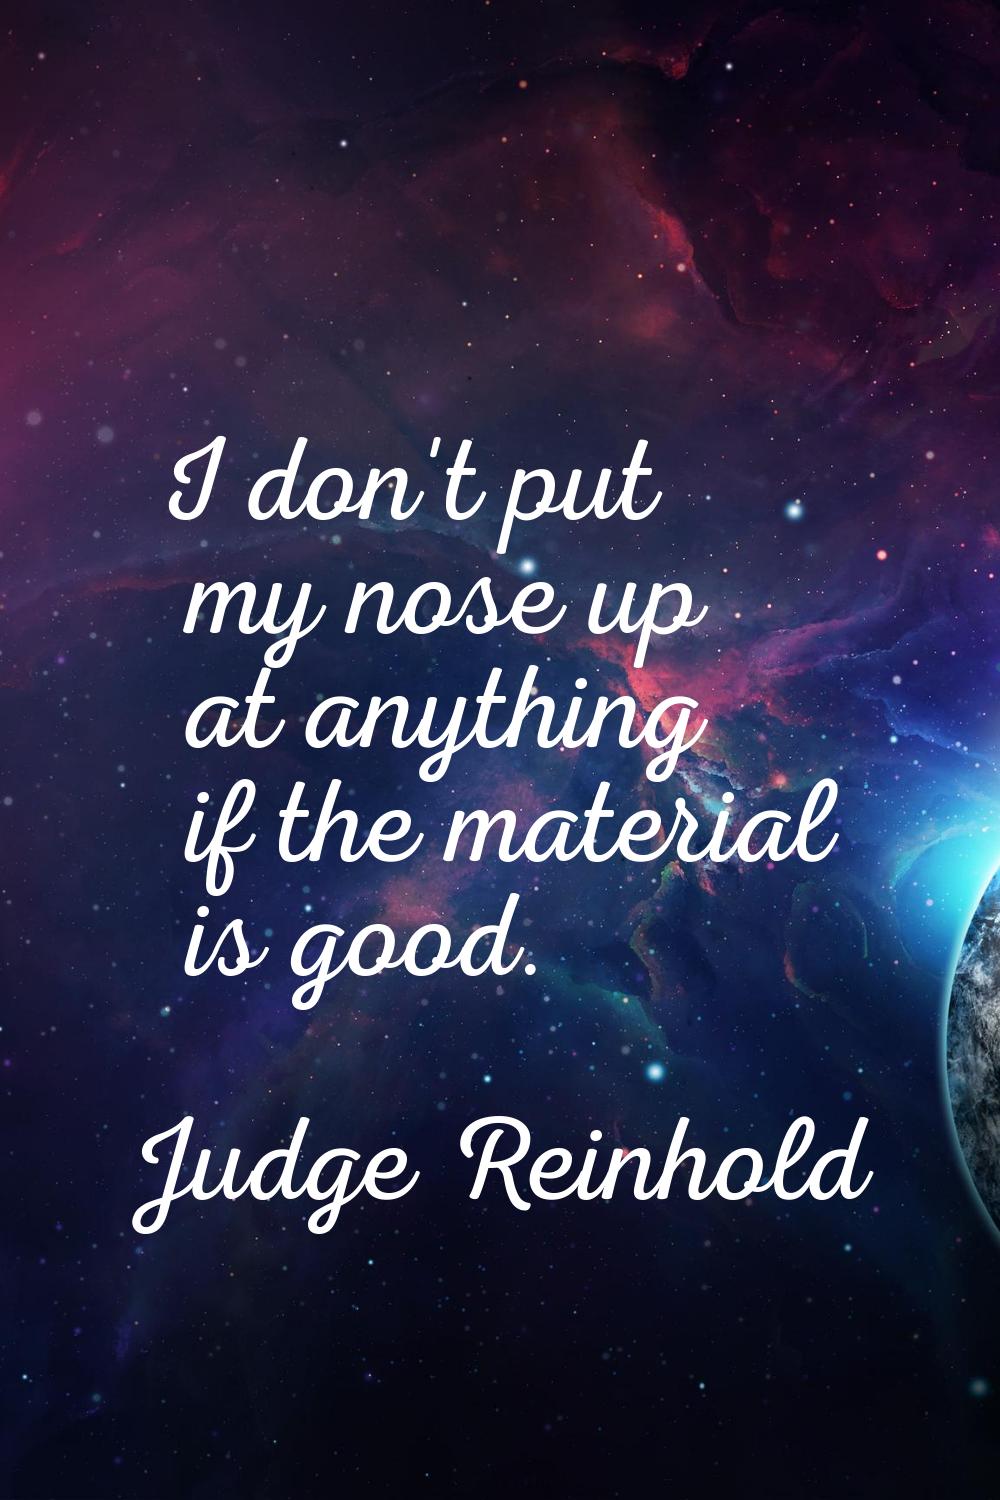 I don't put my nose up at anything if the material is good.